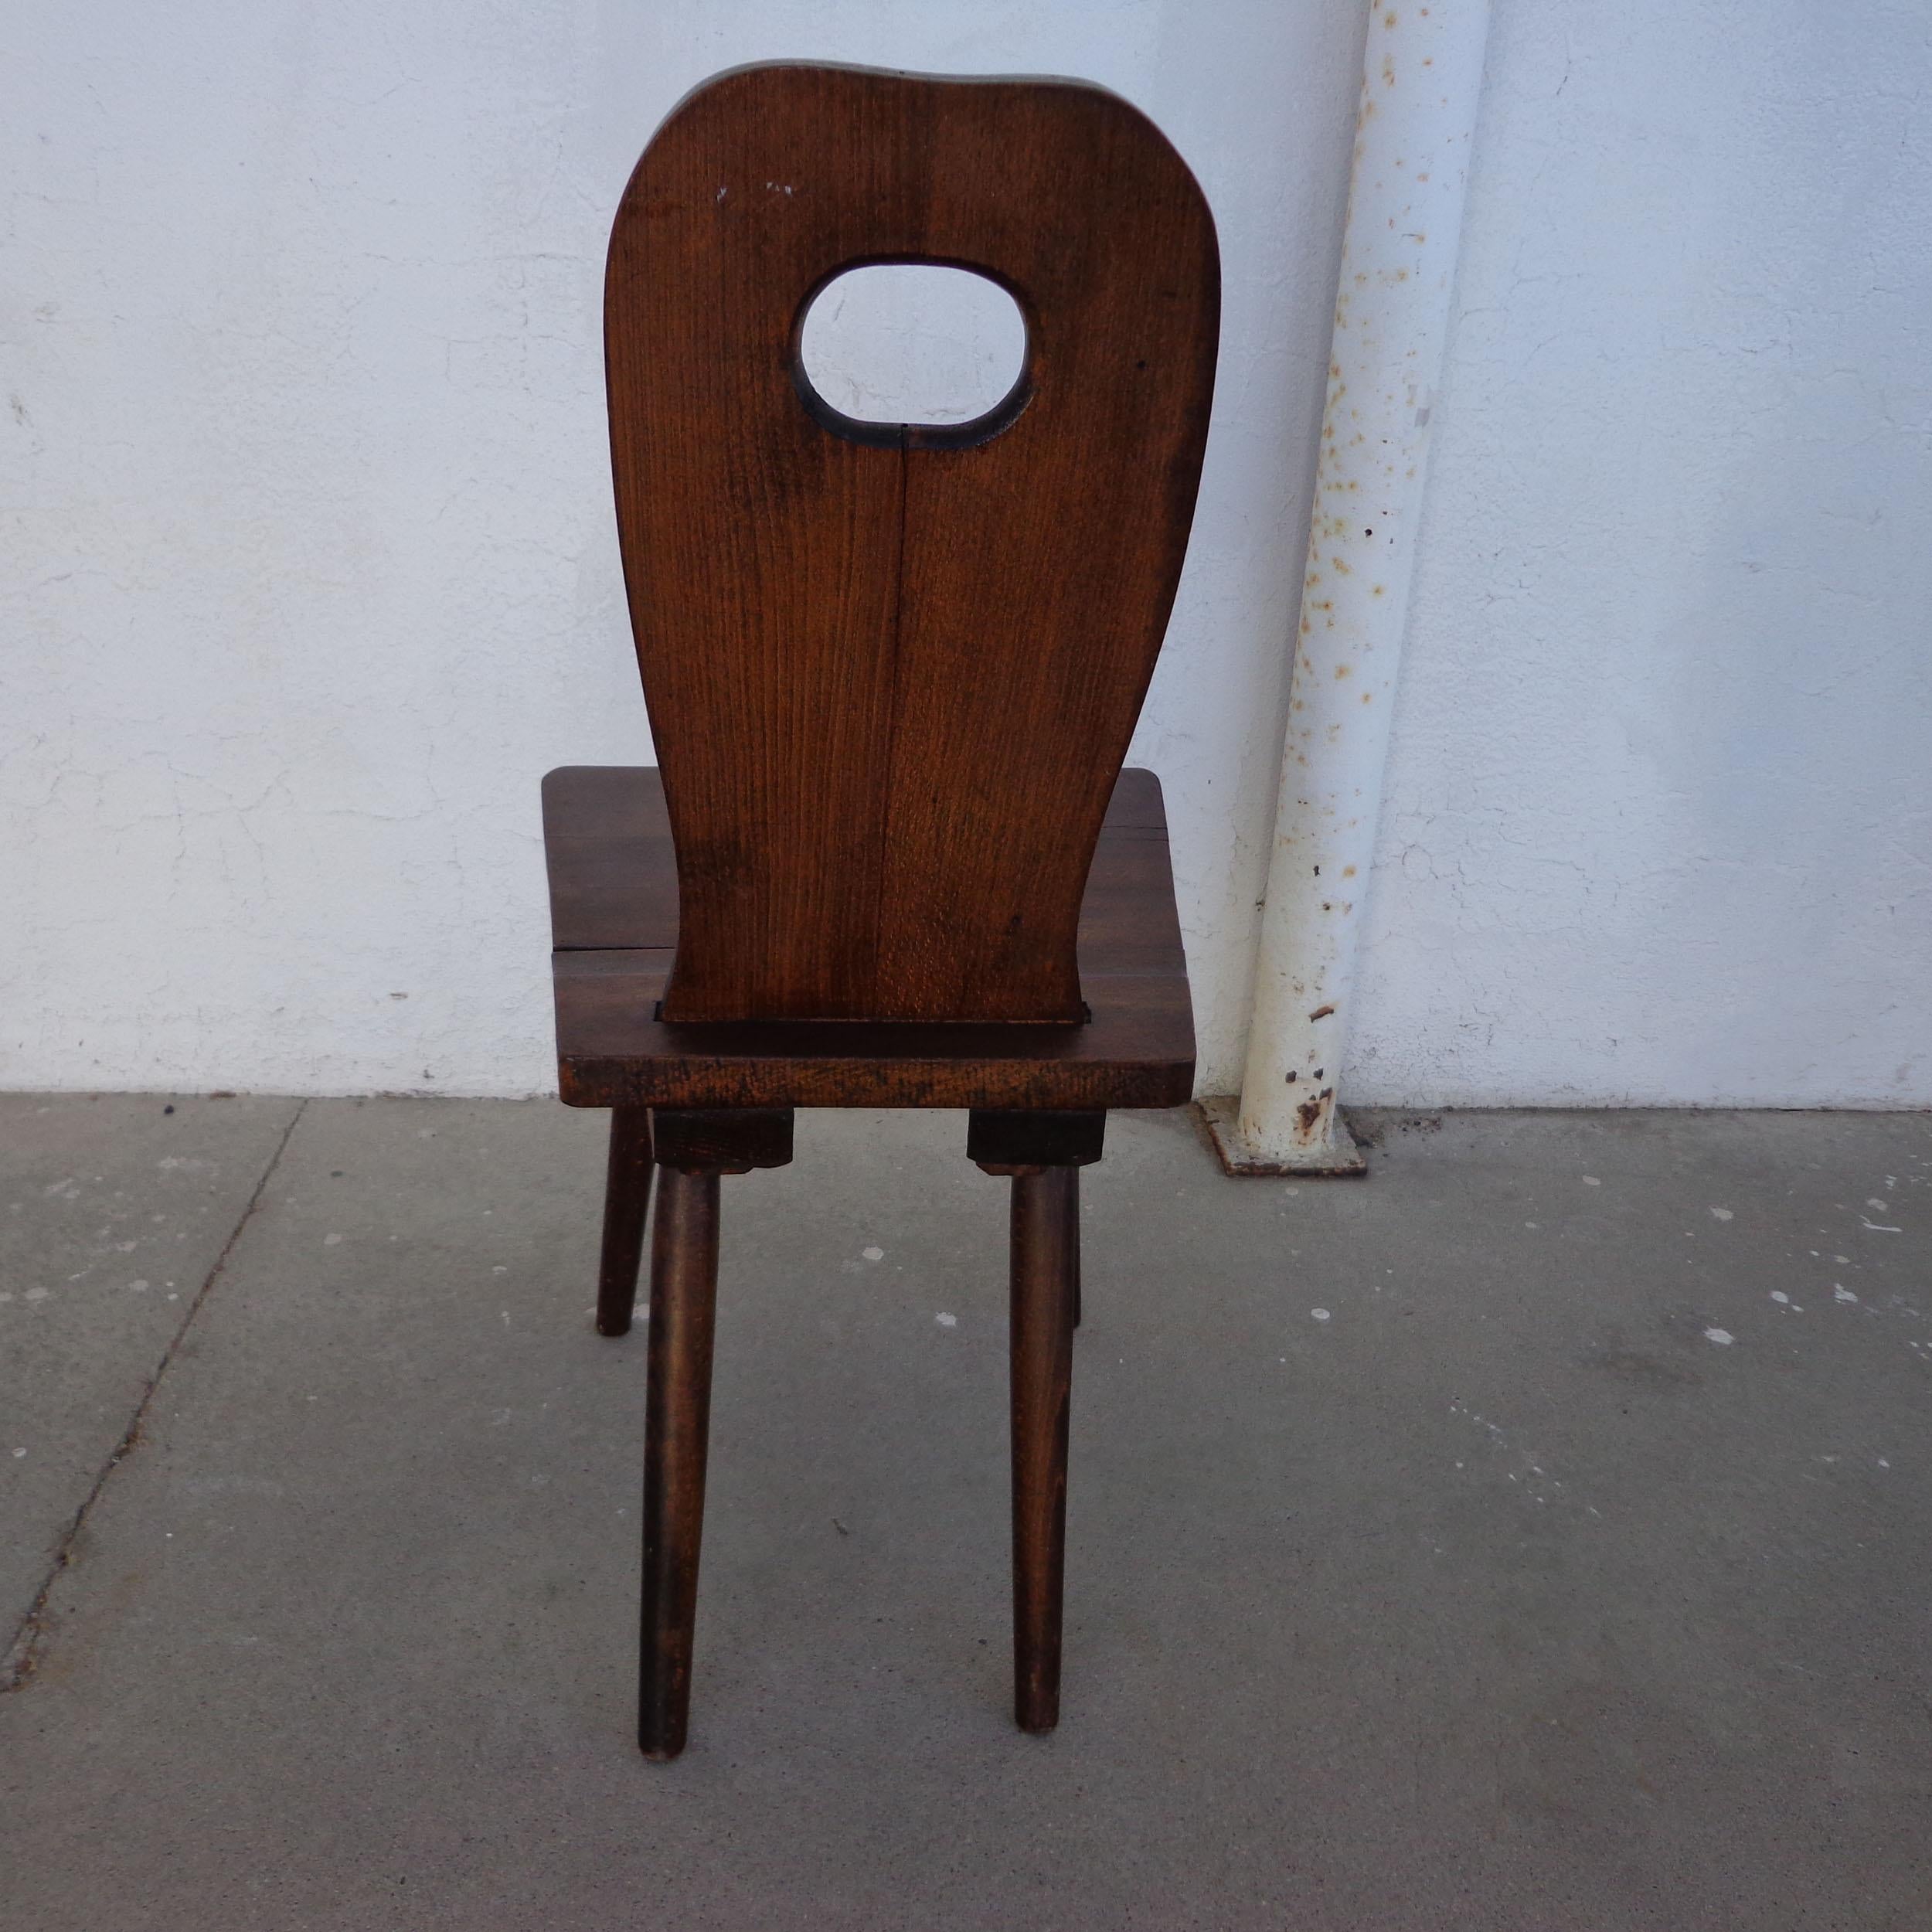 European Set of 8 Rustic Brutalist Scandinavian Dining Chairs Attributed to Uno Åhrén